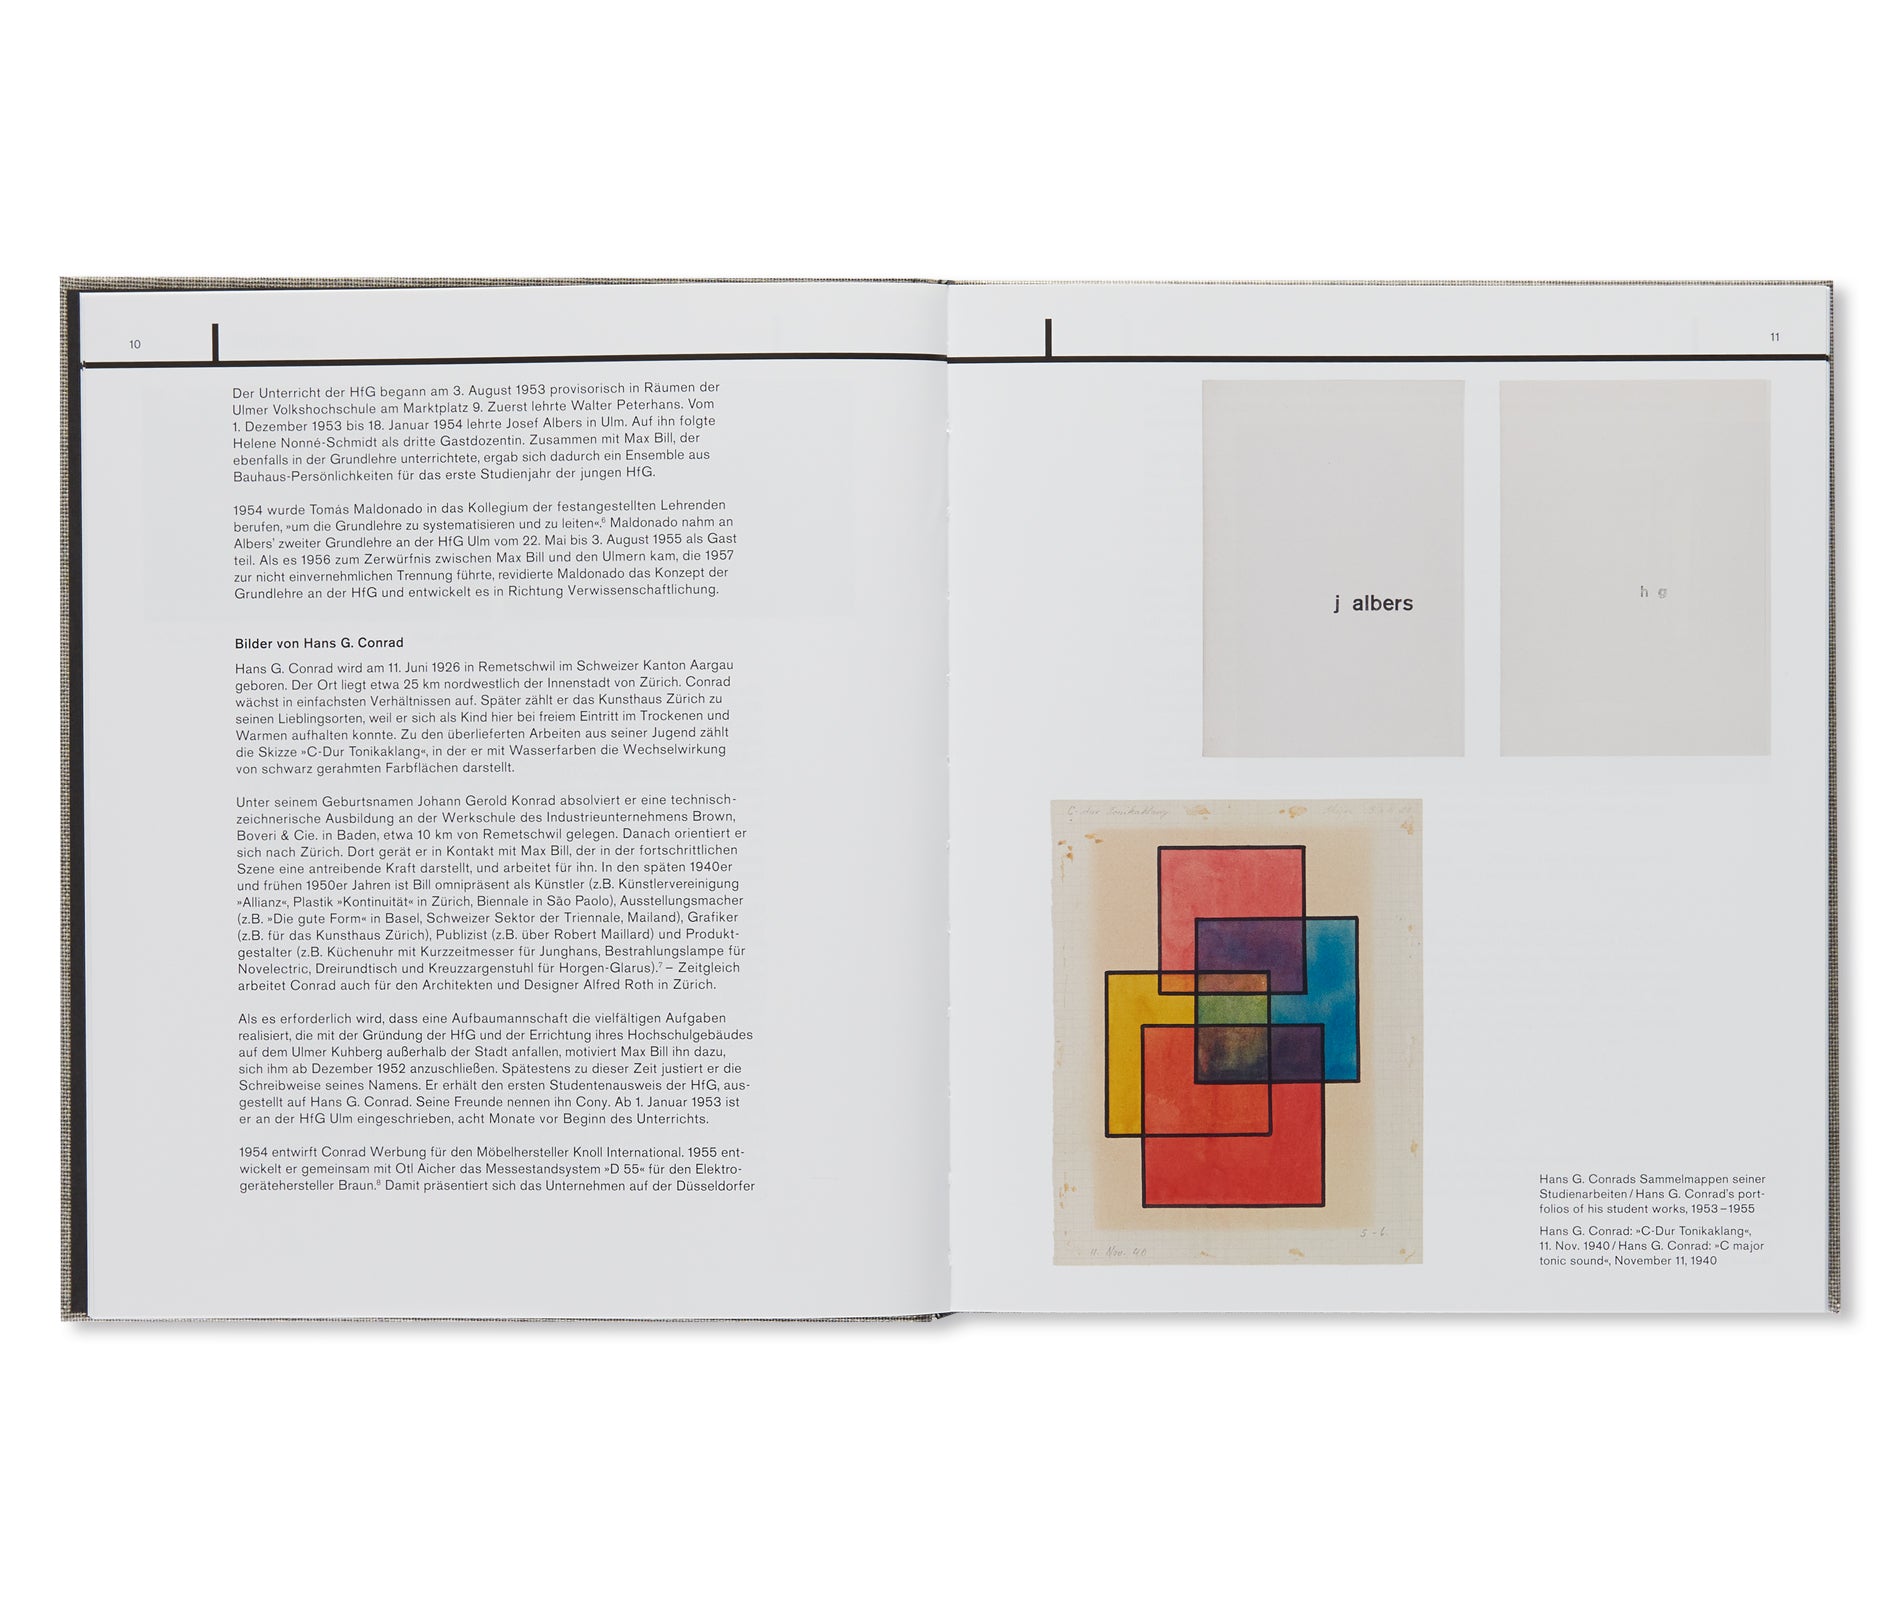 INTERACTION OF ALBERS by Hans G. Conrad